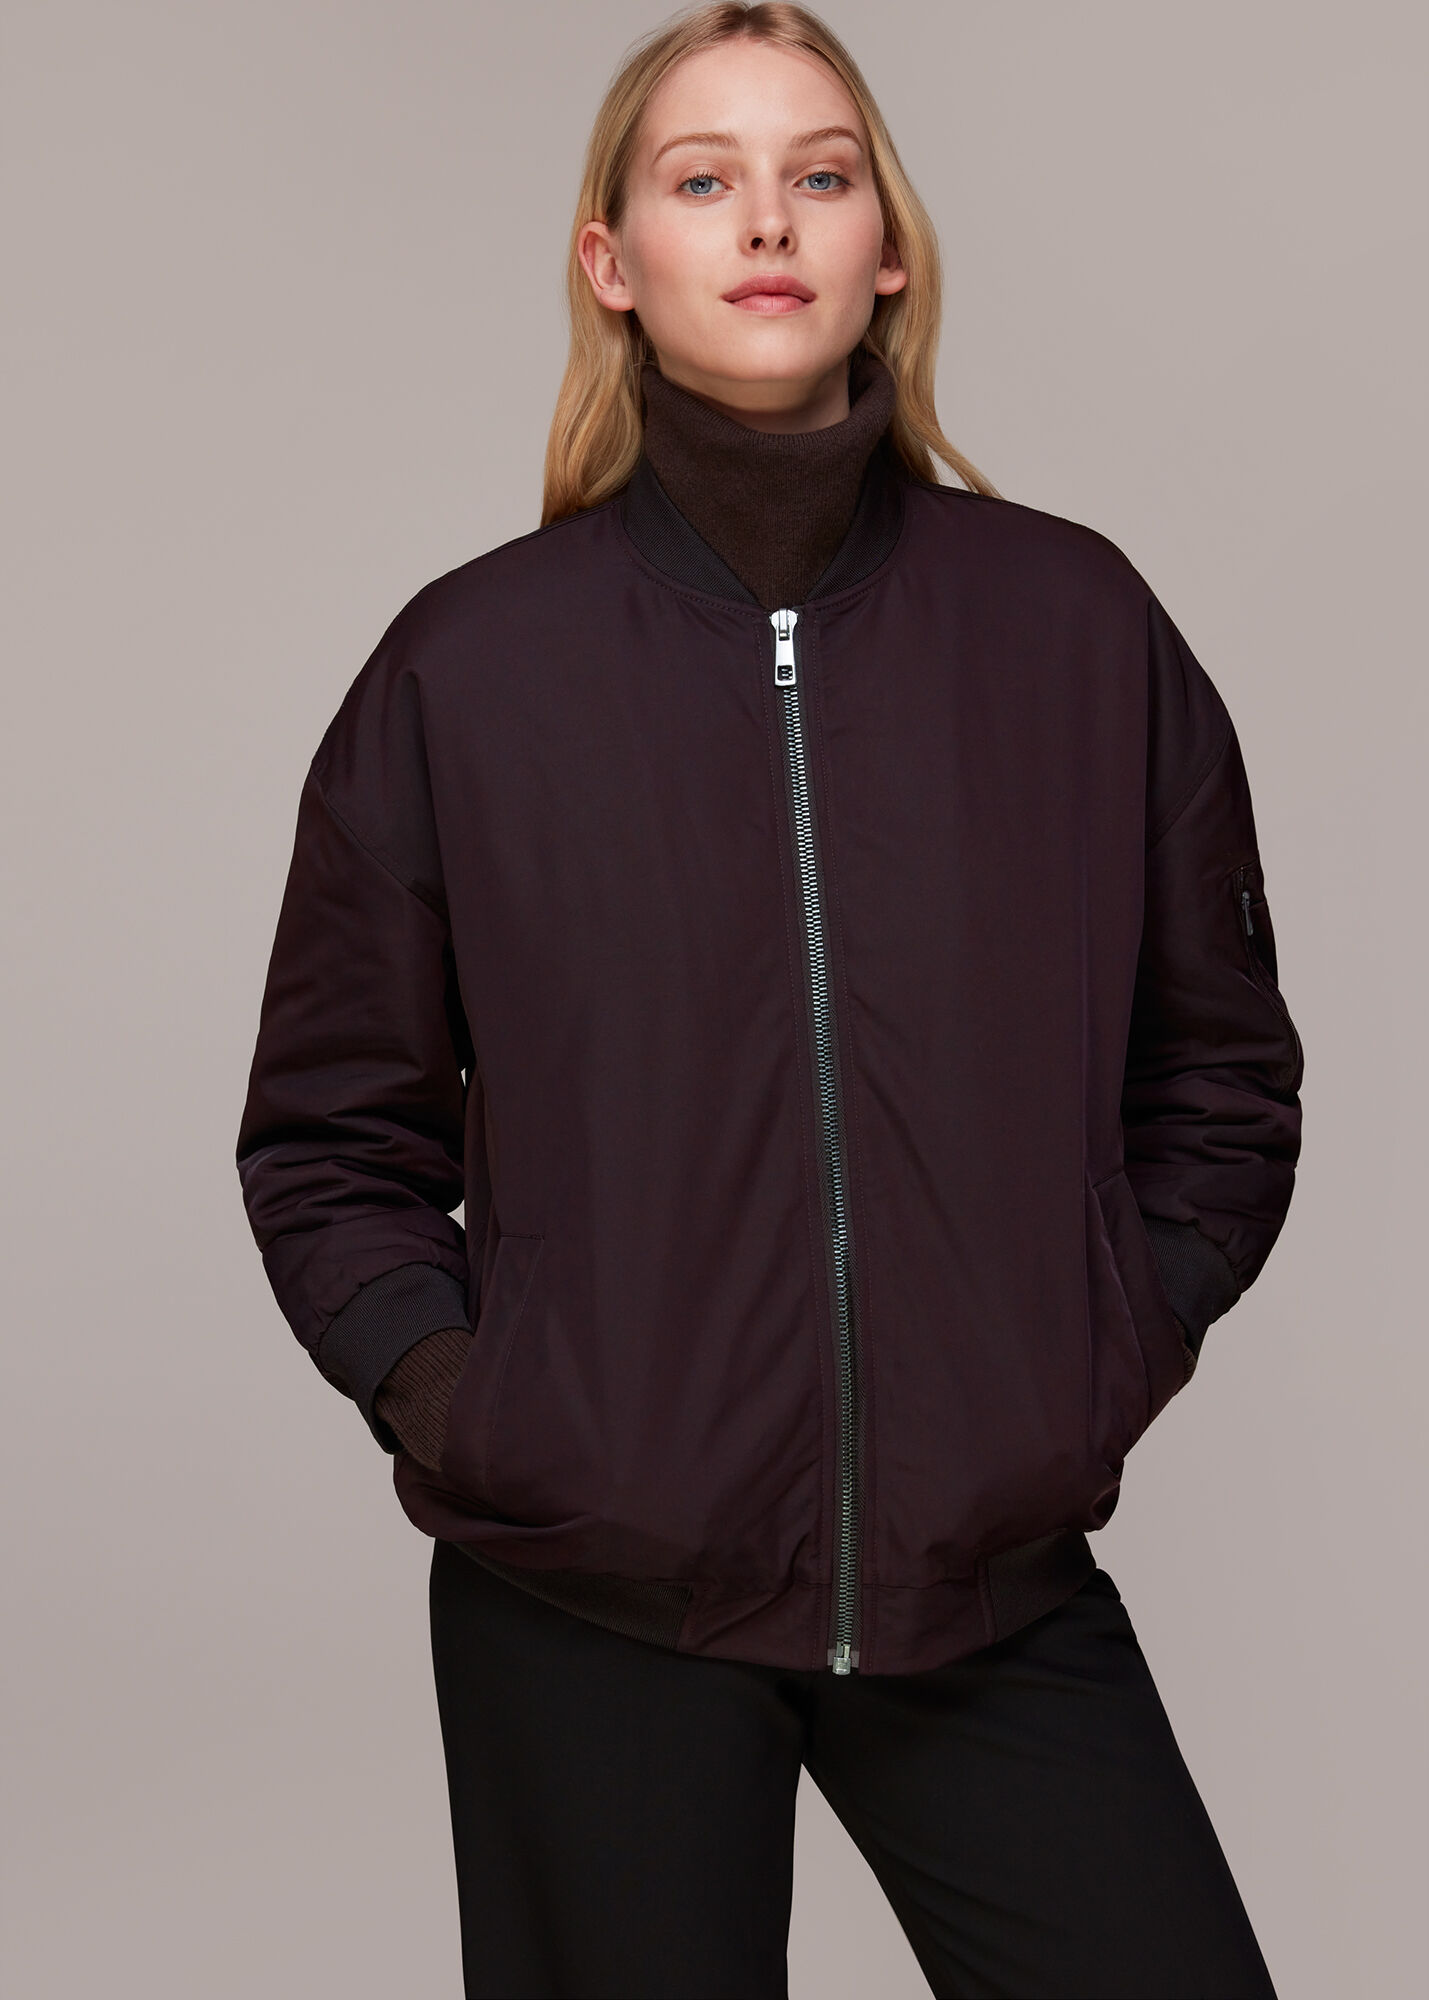 Brown Bomber Jacket in a Relaxed Fit with Side Pockets | Whistles